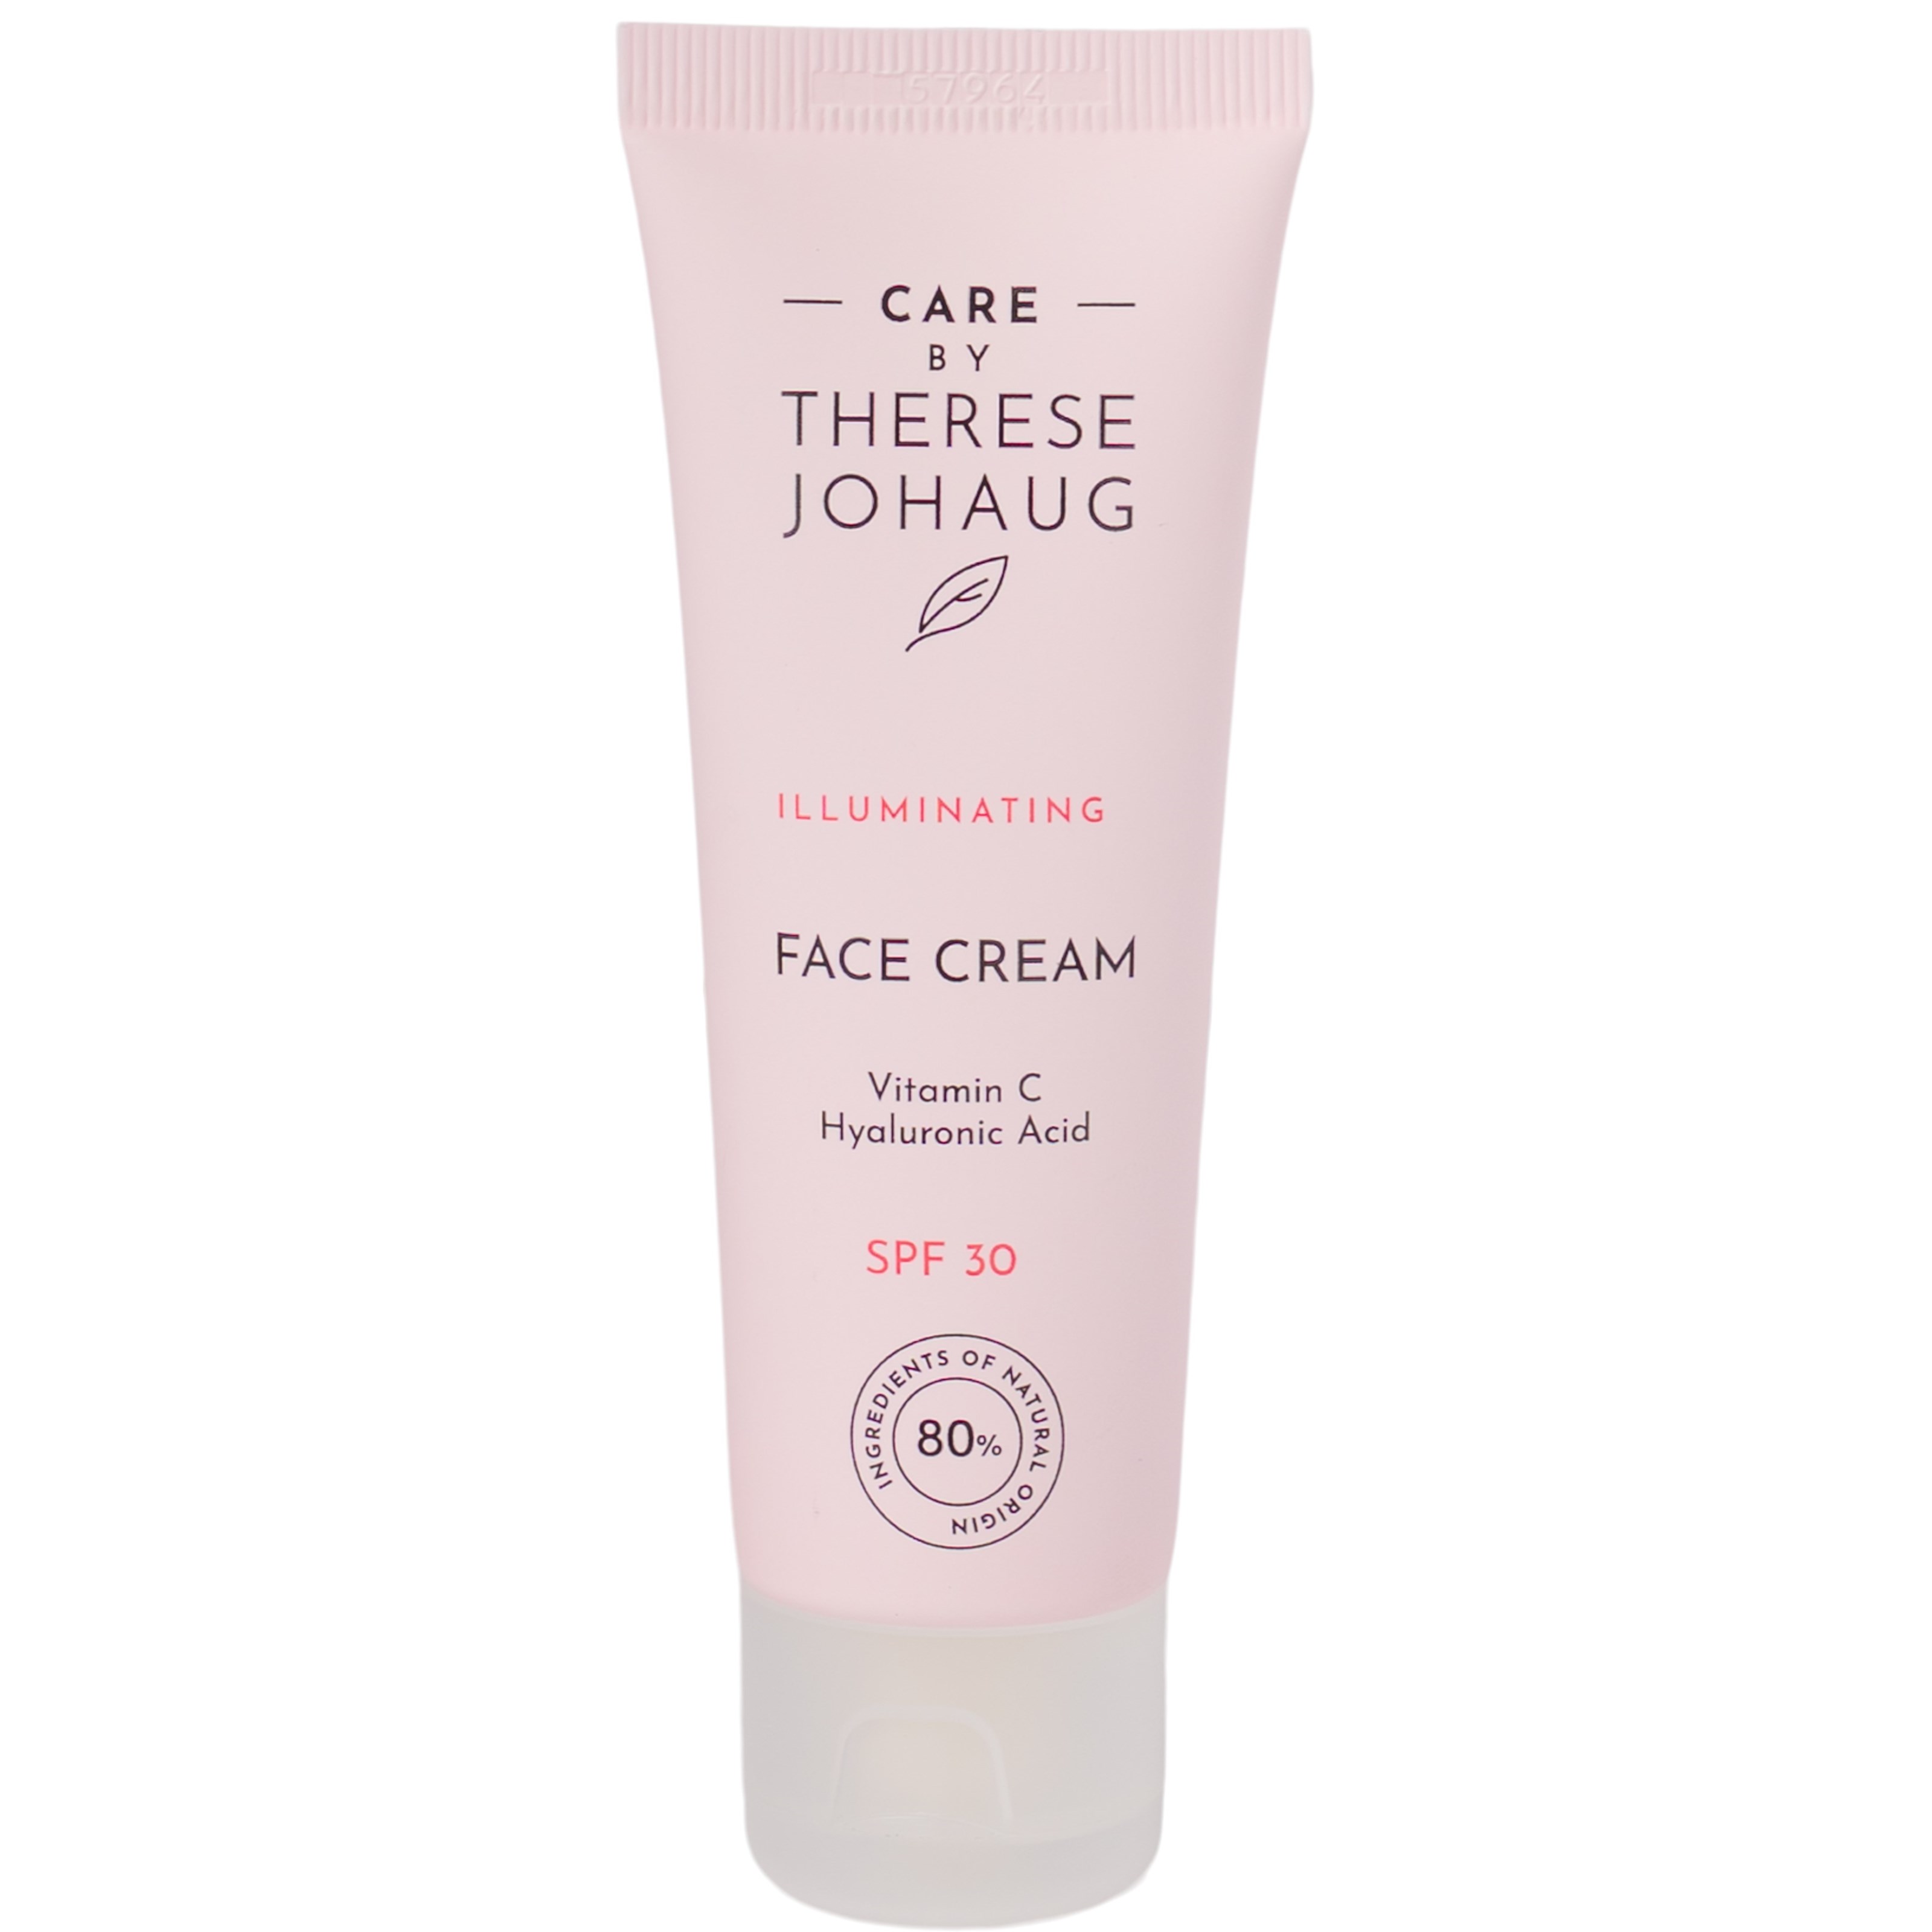 Care by Therese Johaug Face Cream SPF 30 50 ml